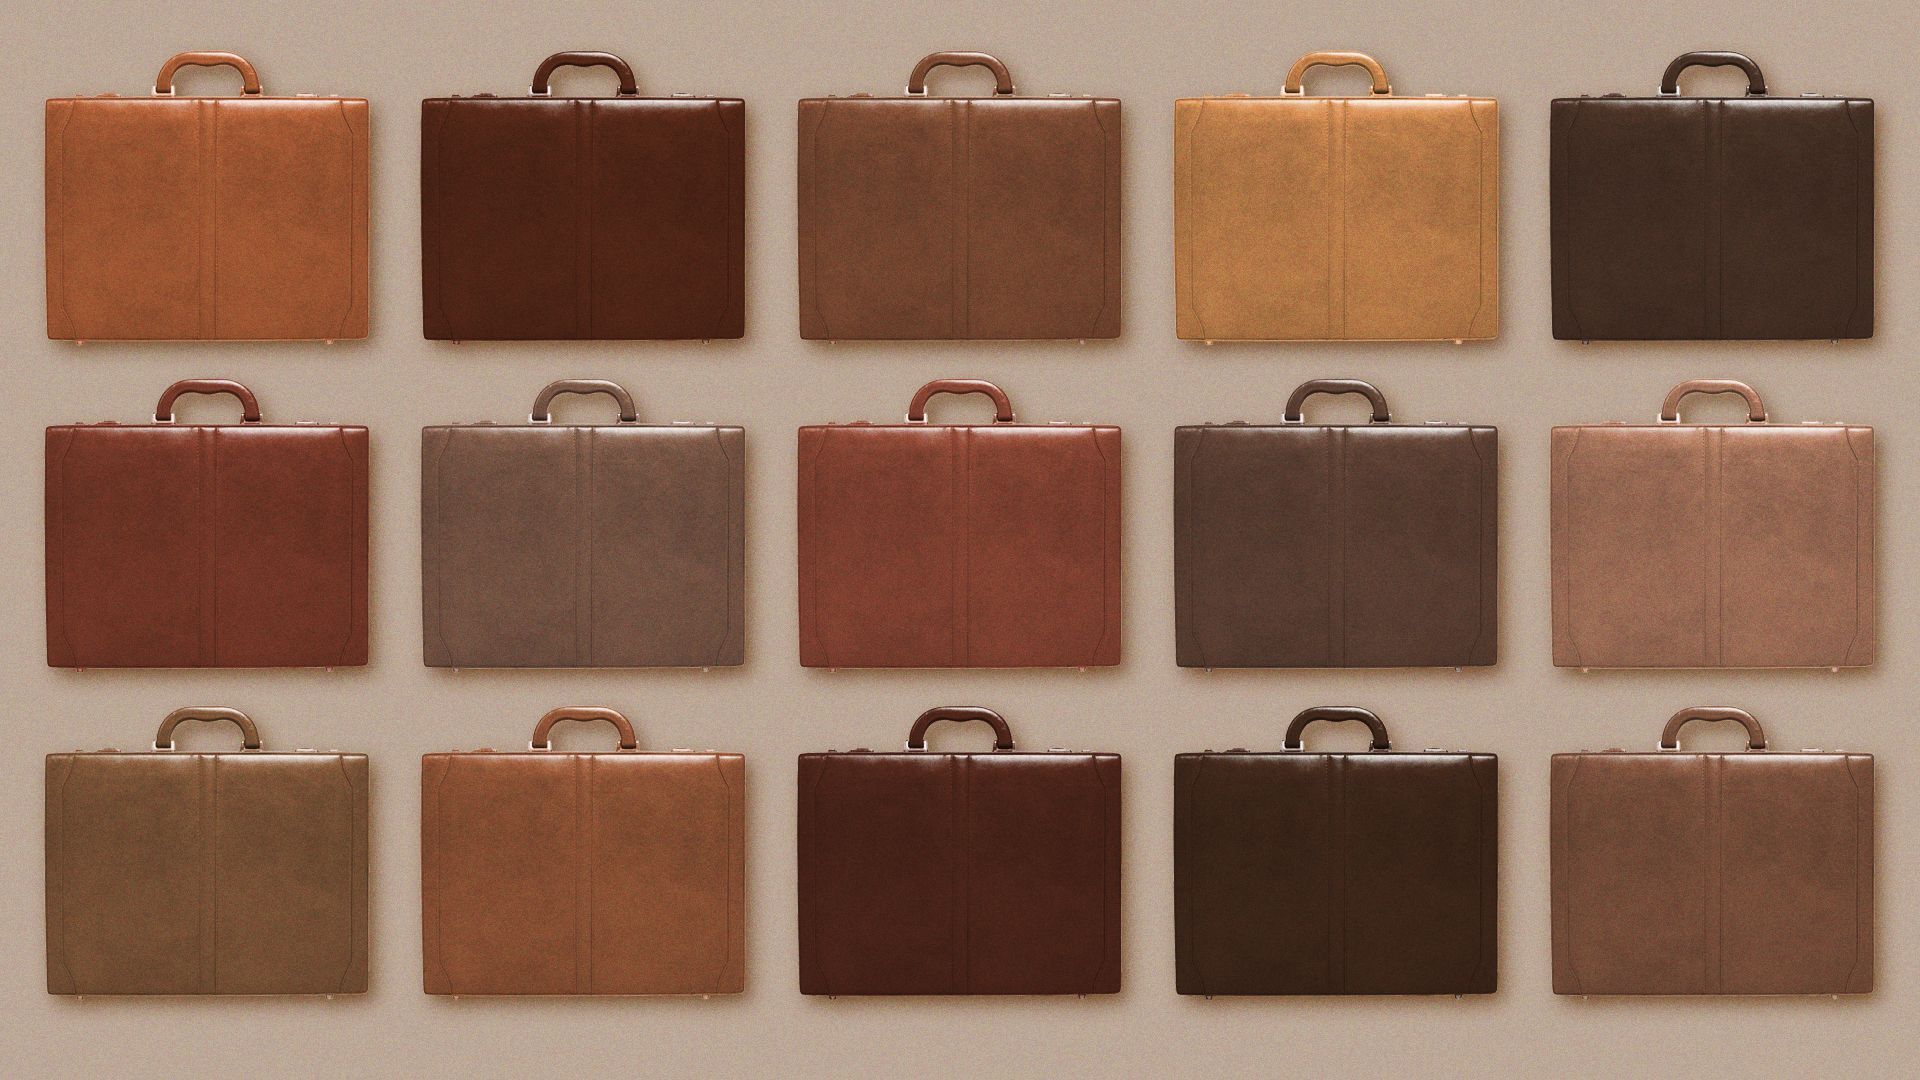 Illustration of a pattern of briefcases in different skintones.